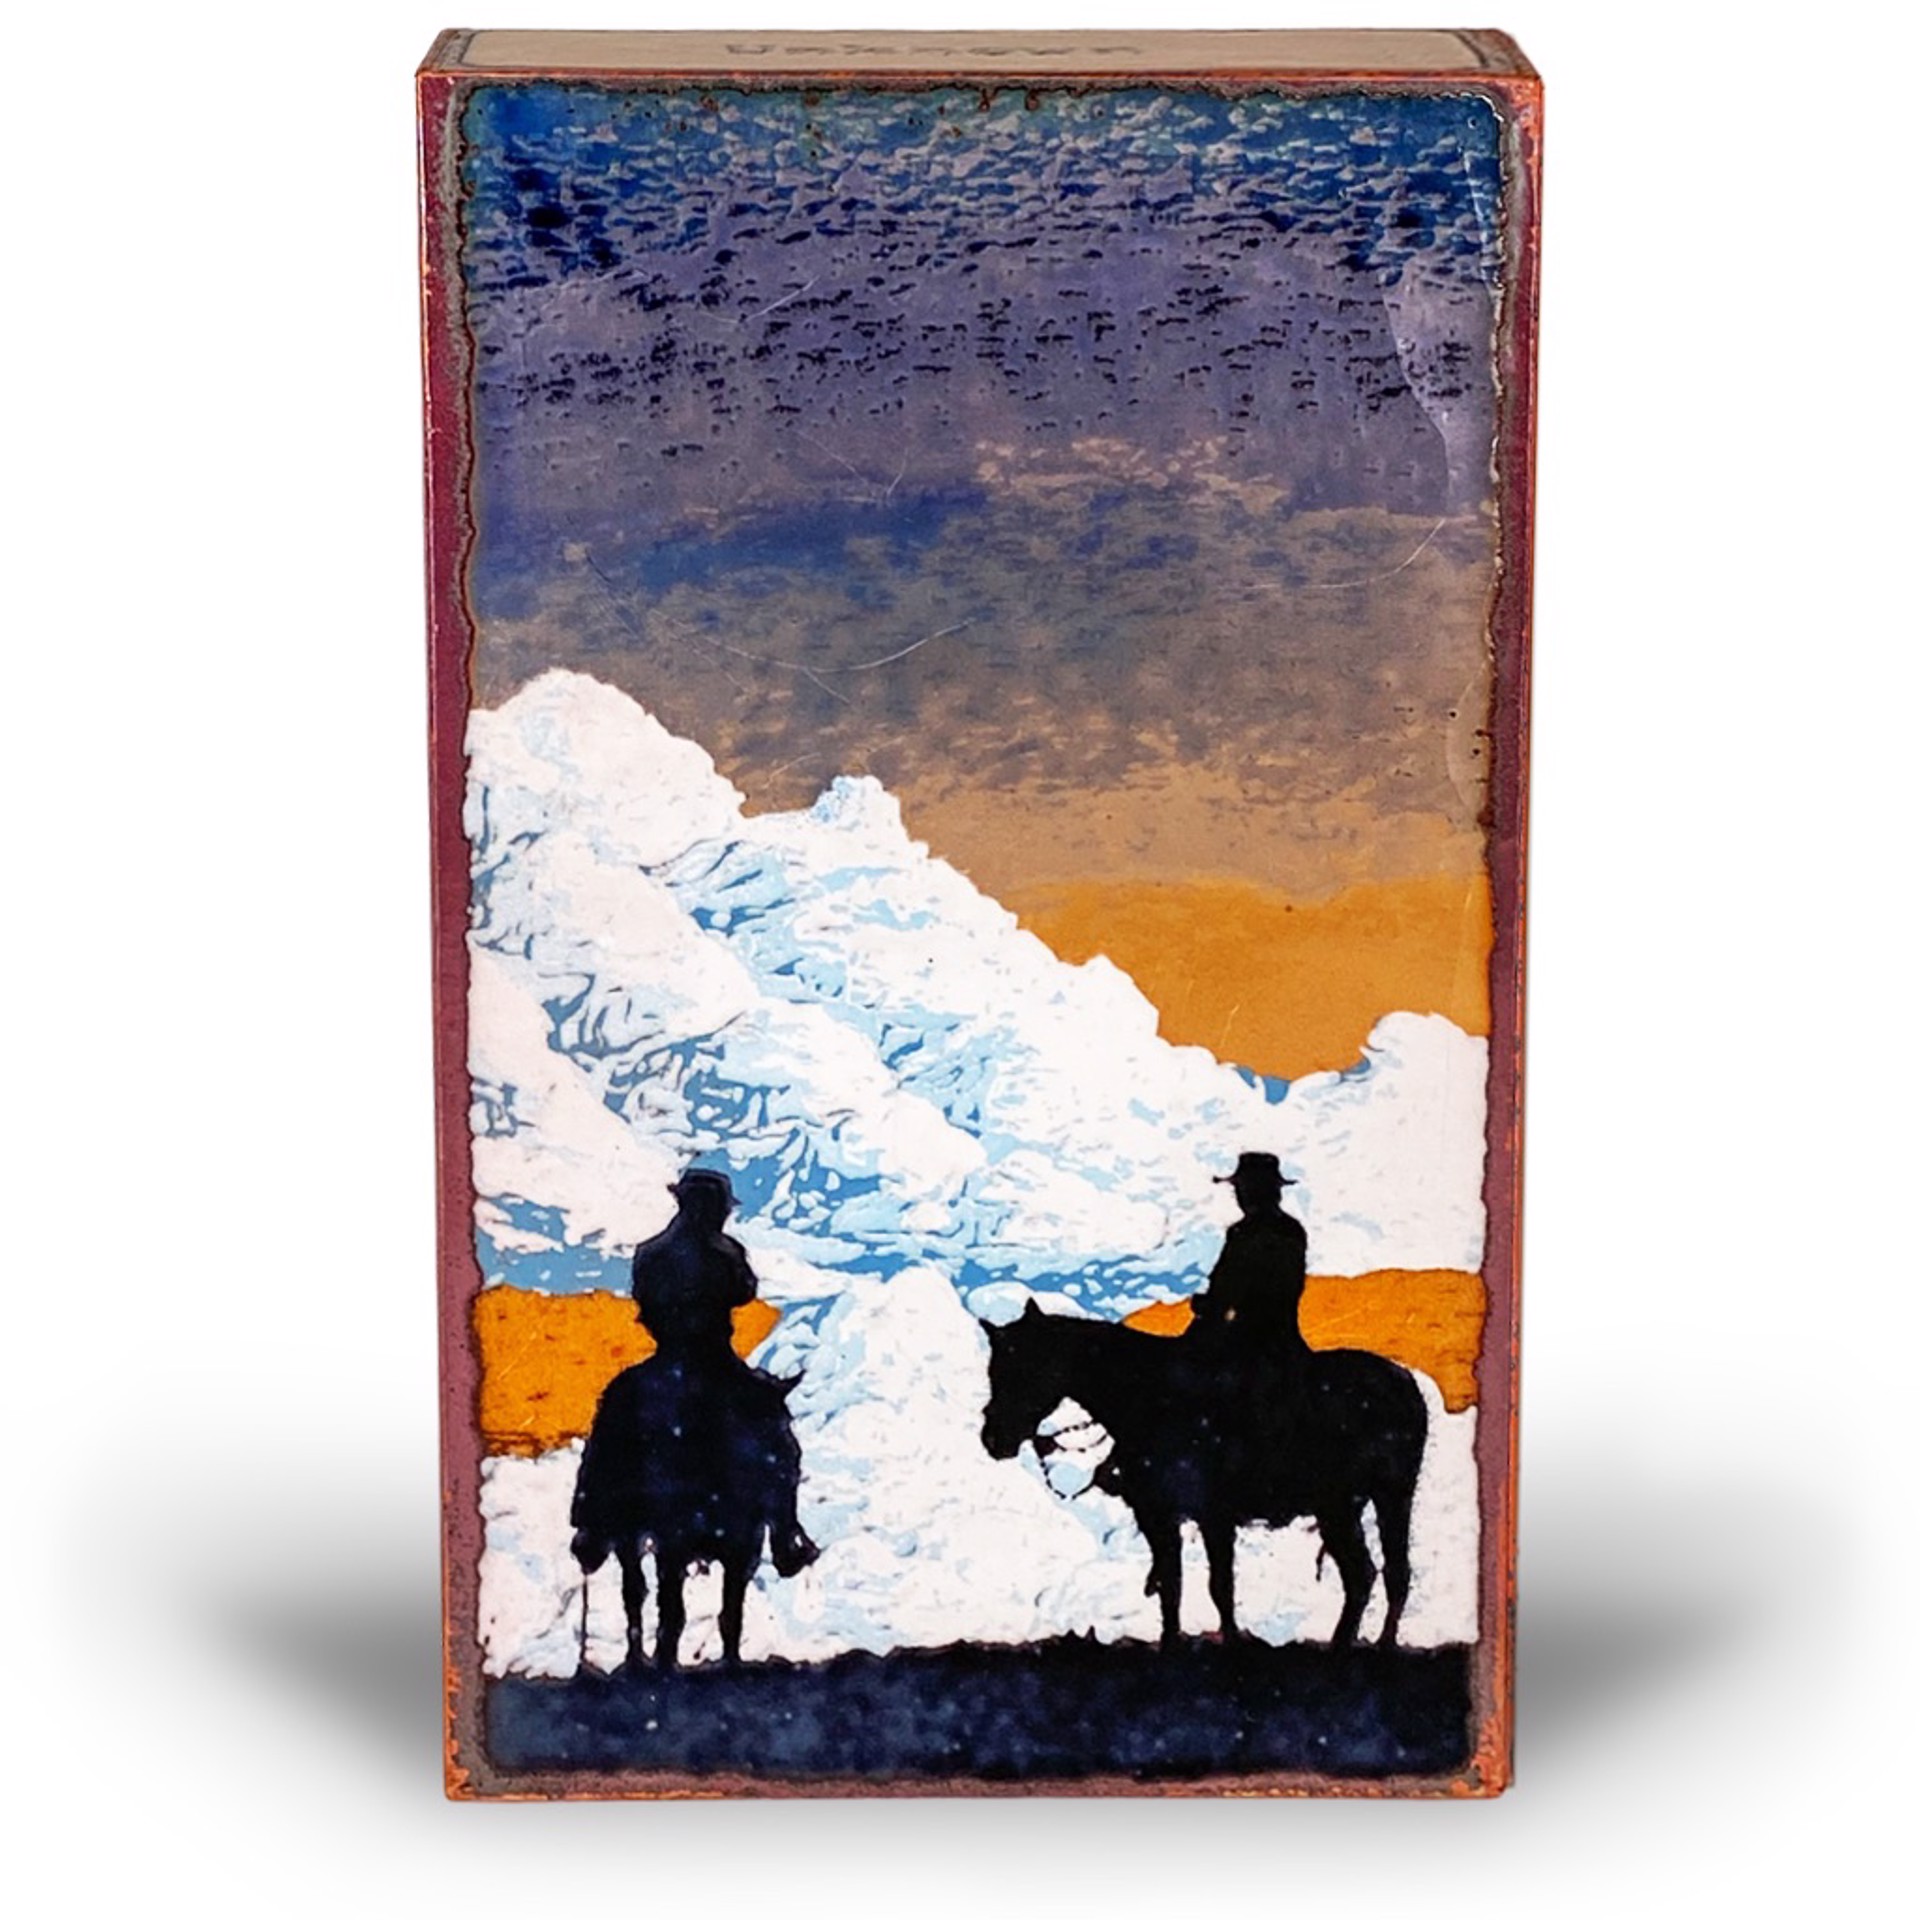 A Houston Llew Glass Fired To Copper Spiritile #256 Featuring Two People On Horses With An Abstract Landscape Behind And A Quote About Friendship And Riding Horses, Available At Gallery Wild